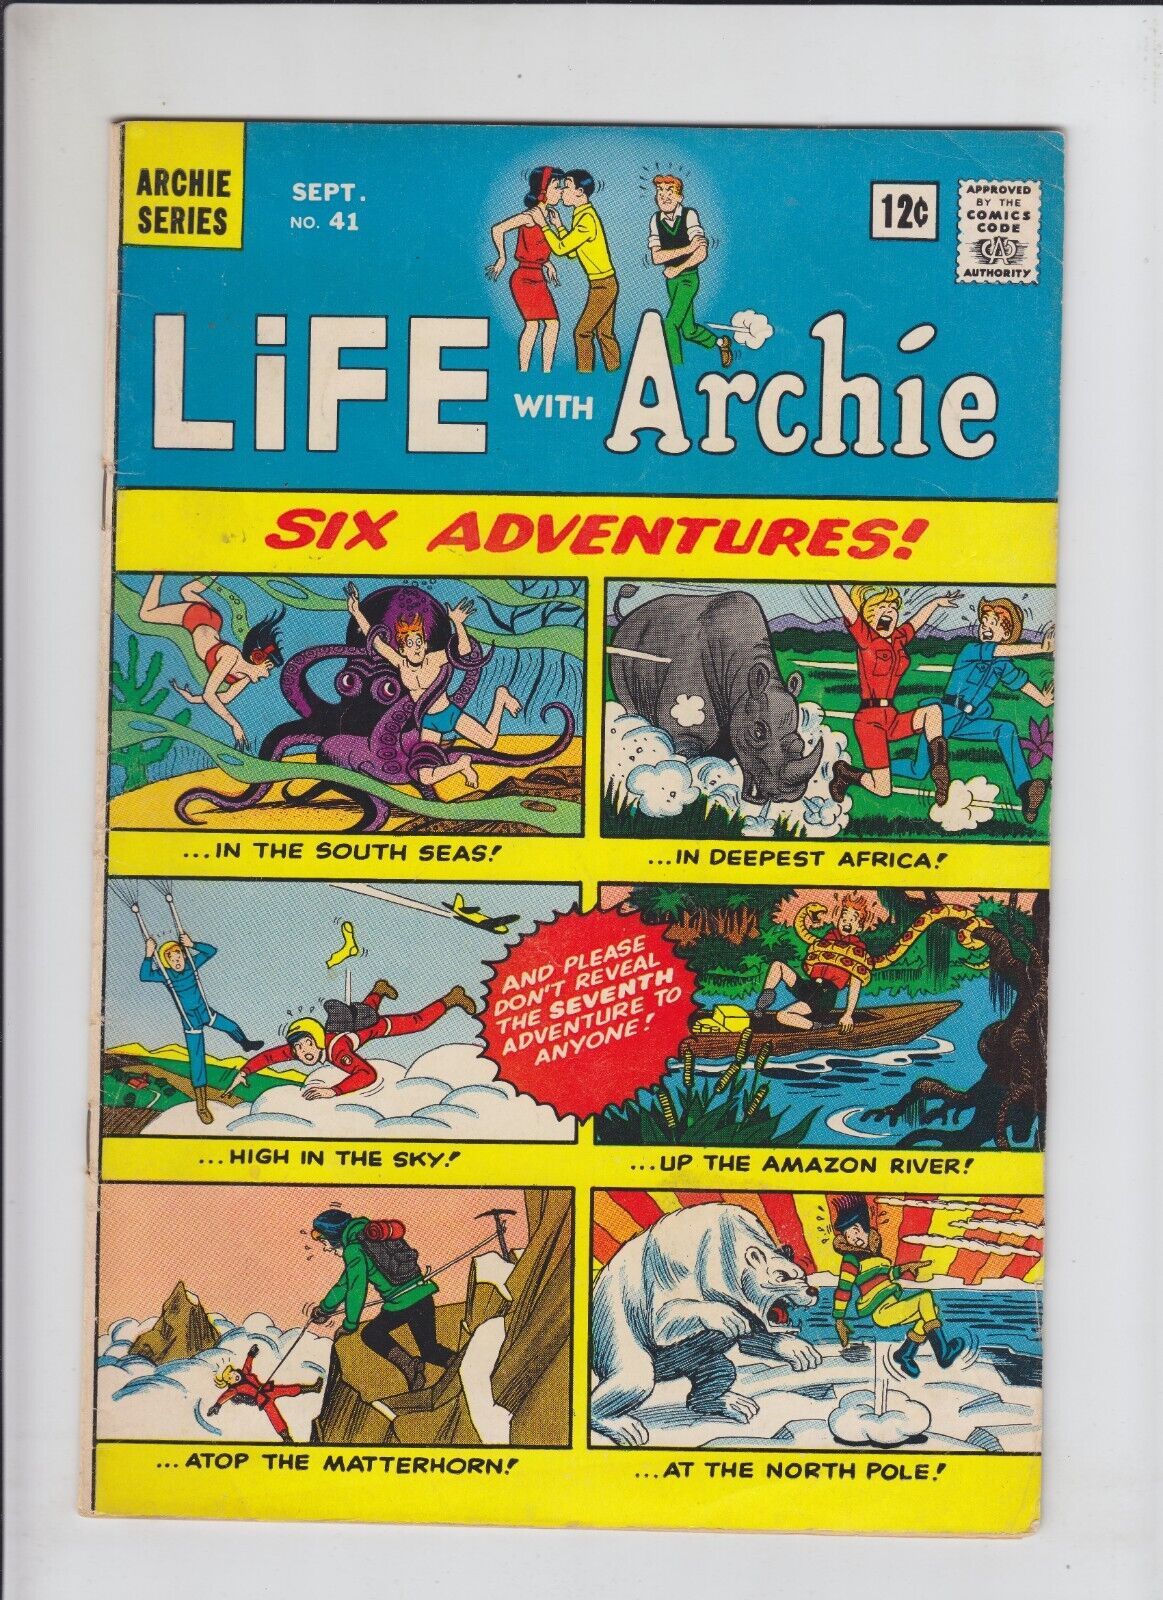 Life with Archie #41 VG; Archie | September 1965 - Godzilla homage on page one